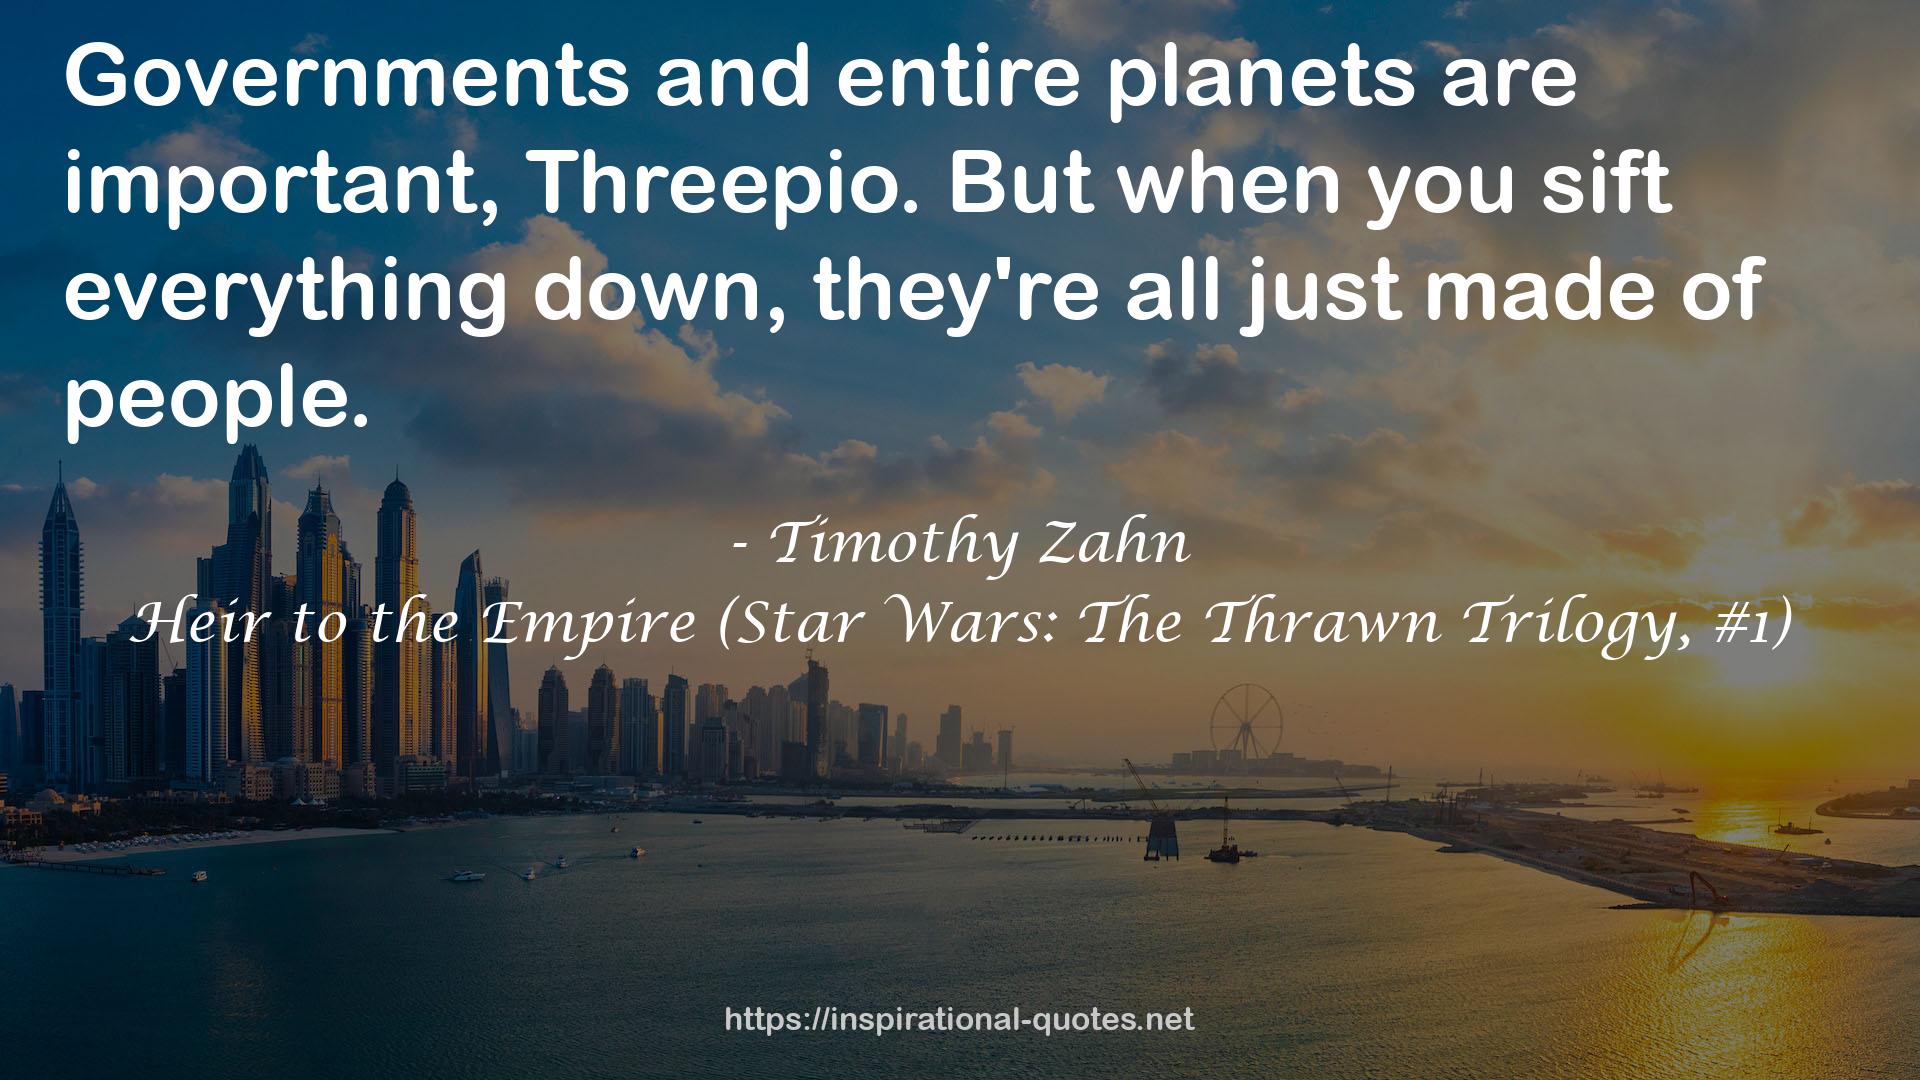 Heir to the Empire (Star Wars: The Thrawn Trilogy, #1) QUOTES